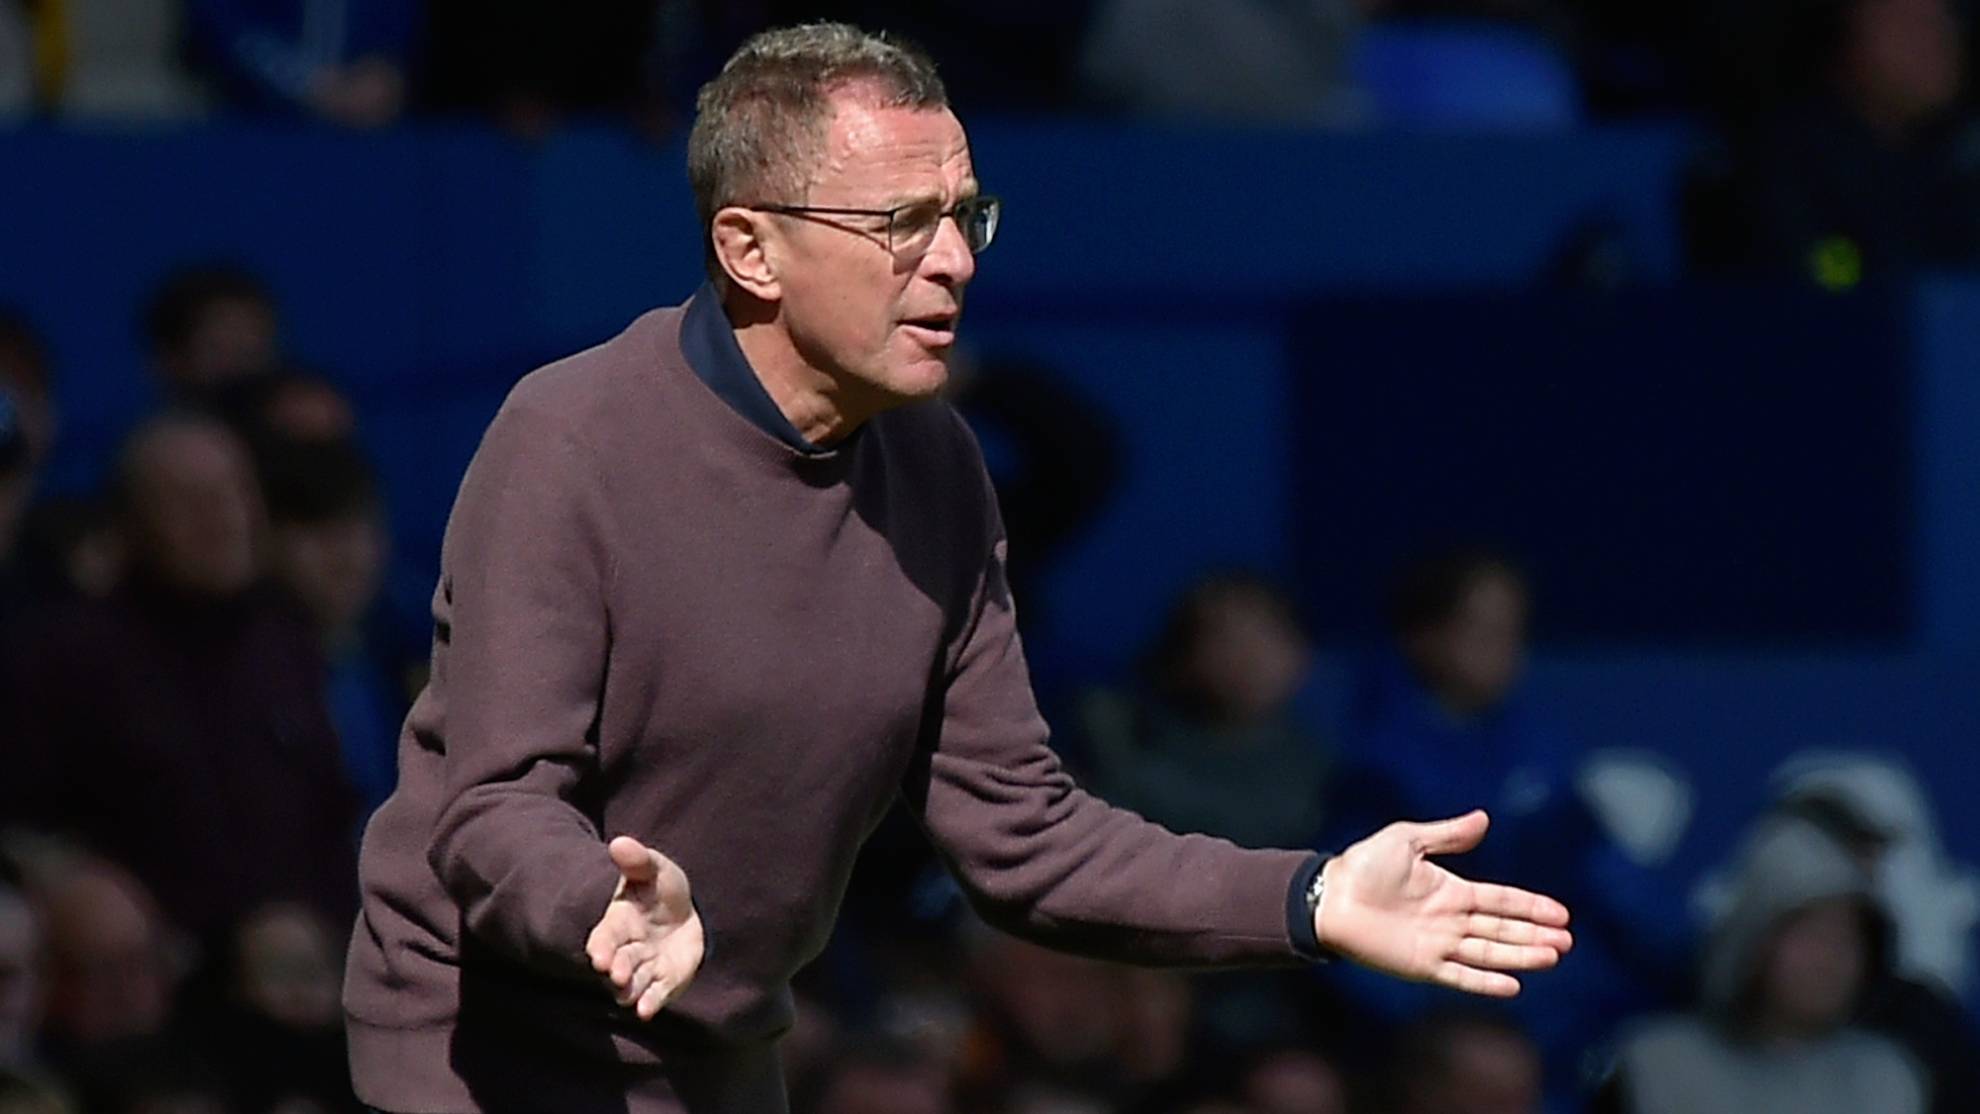 Rangnick criticises Man United players after Everton loss